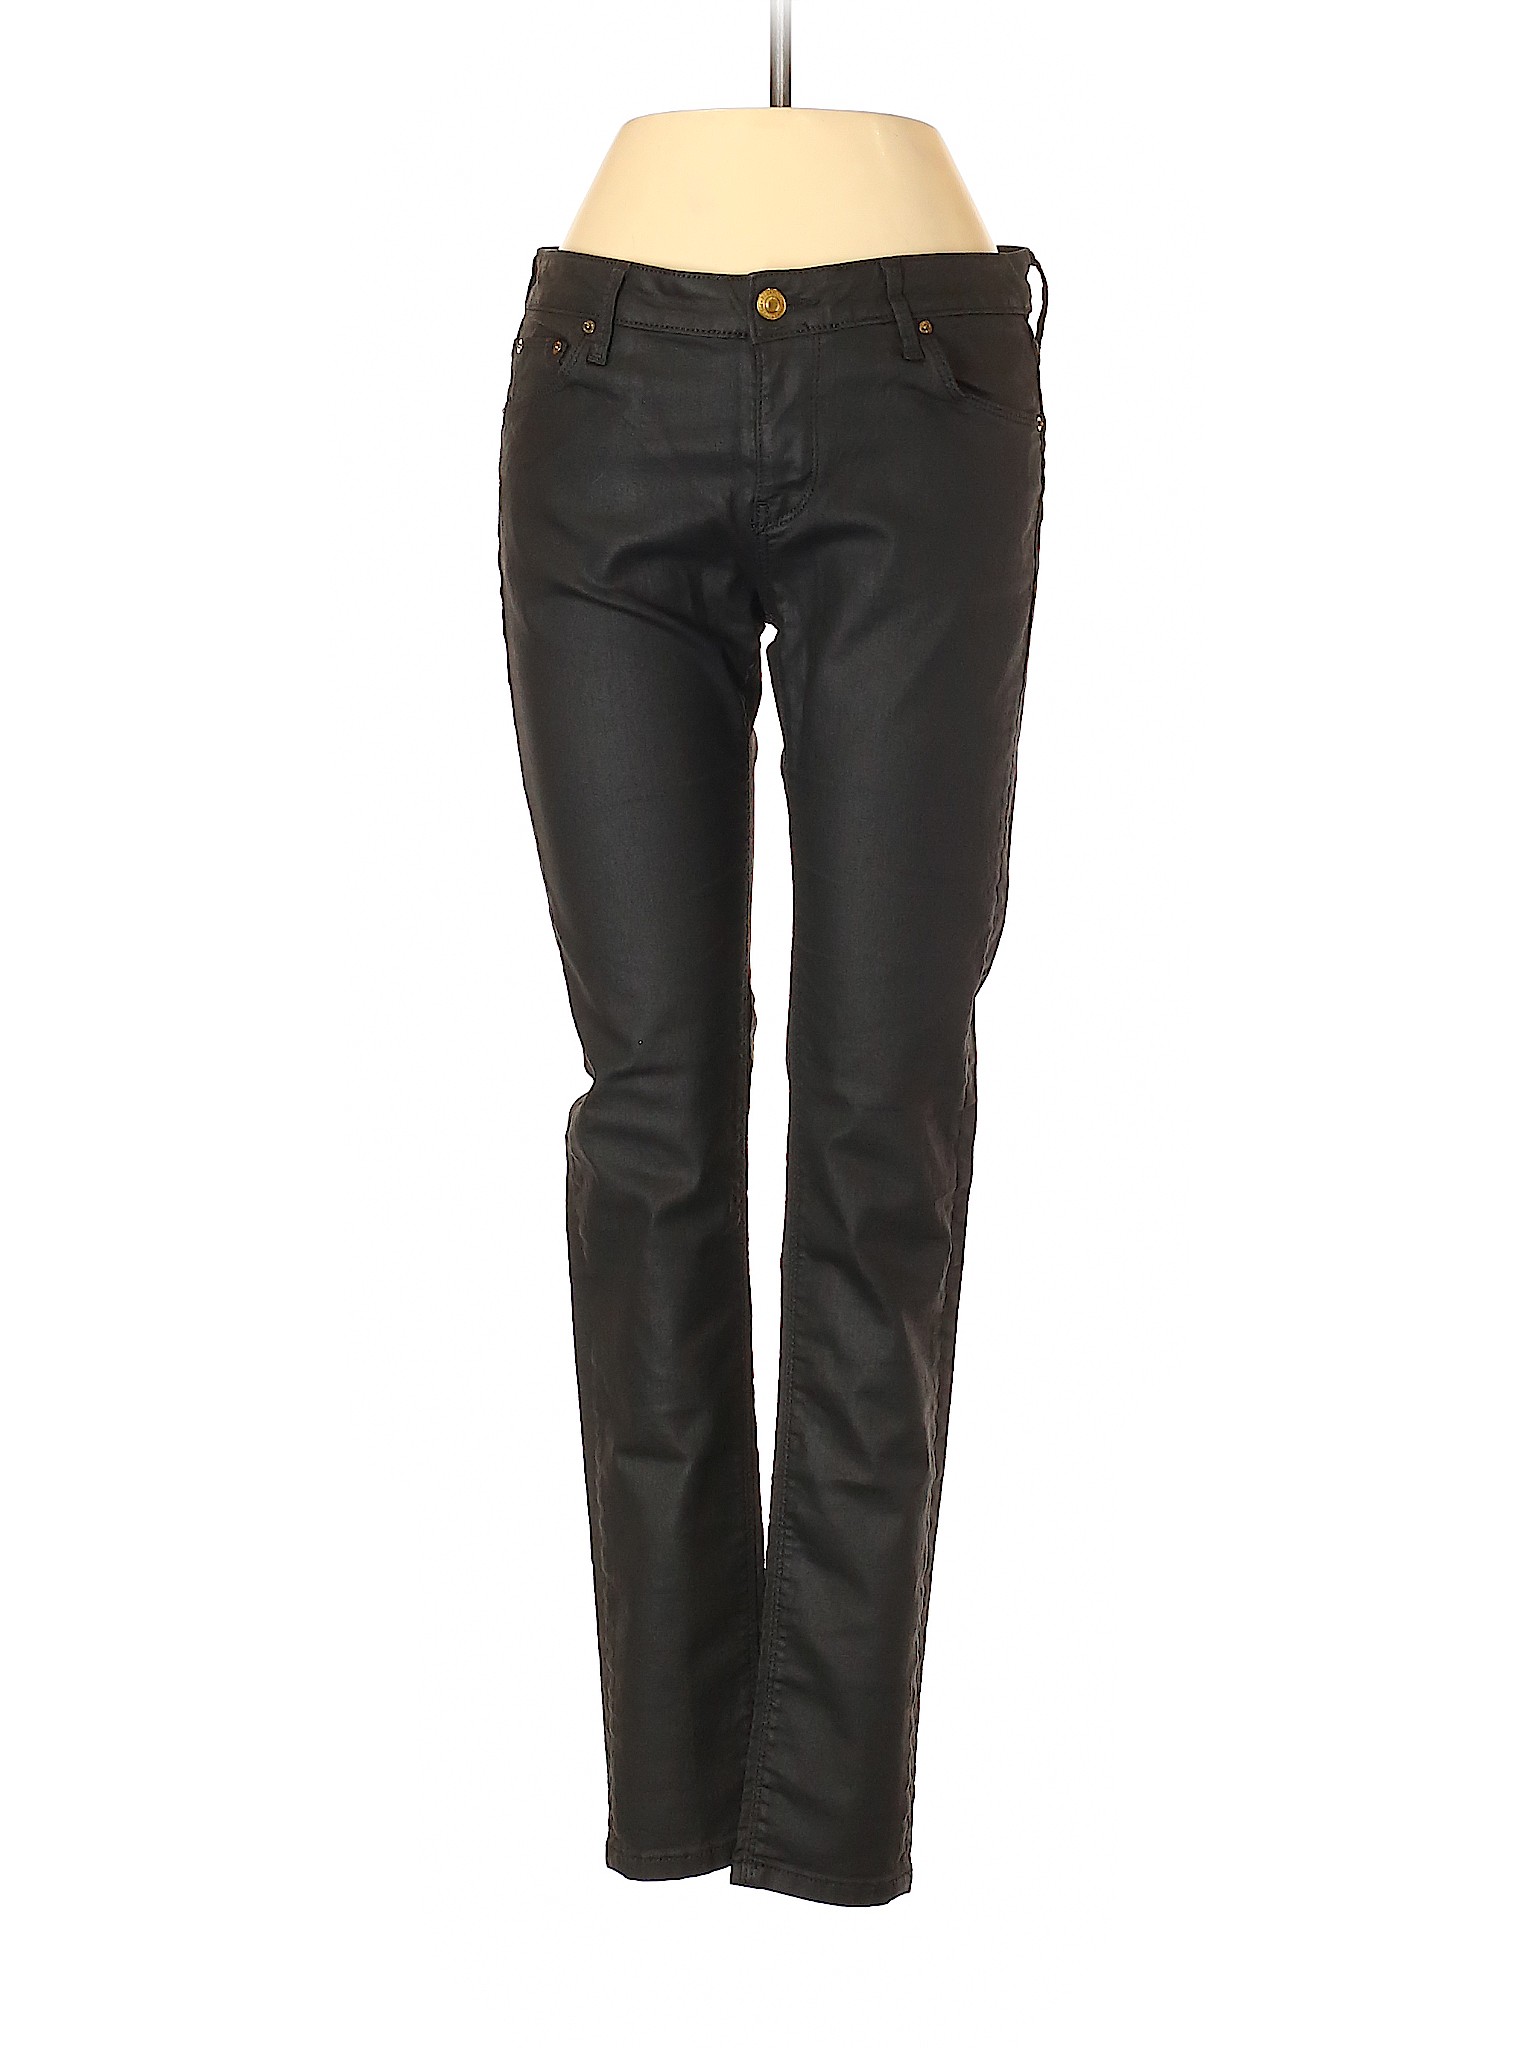 Leara Woman Solid Black Faux Leather Pants Size 4 - 62% off | thredUP